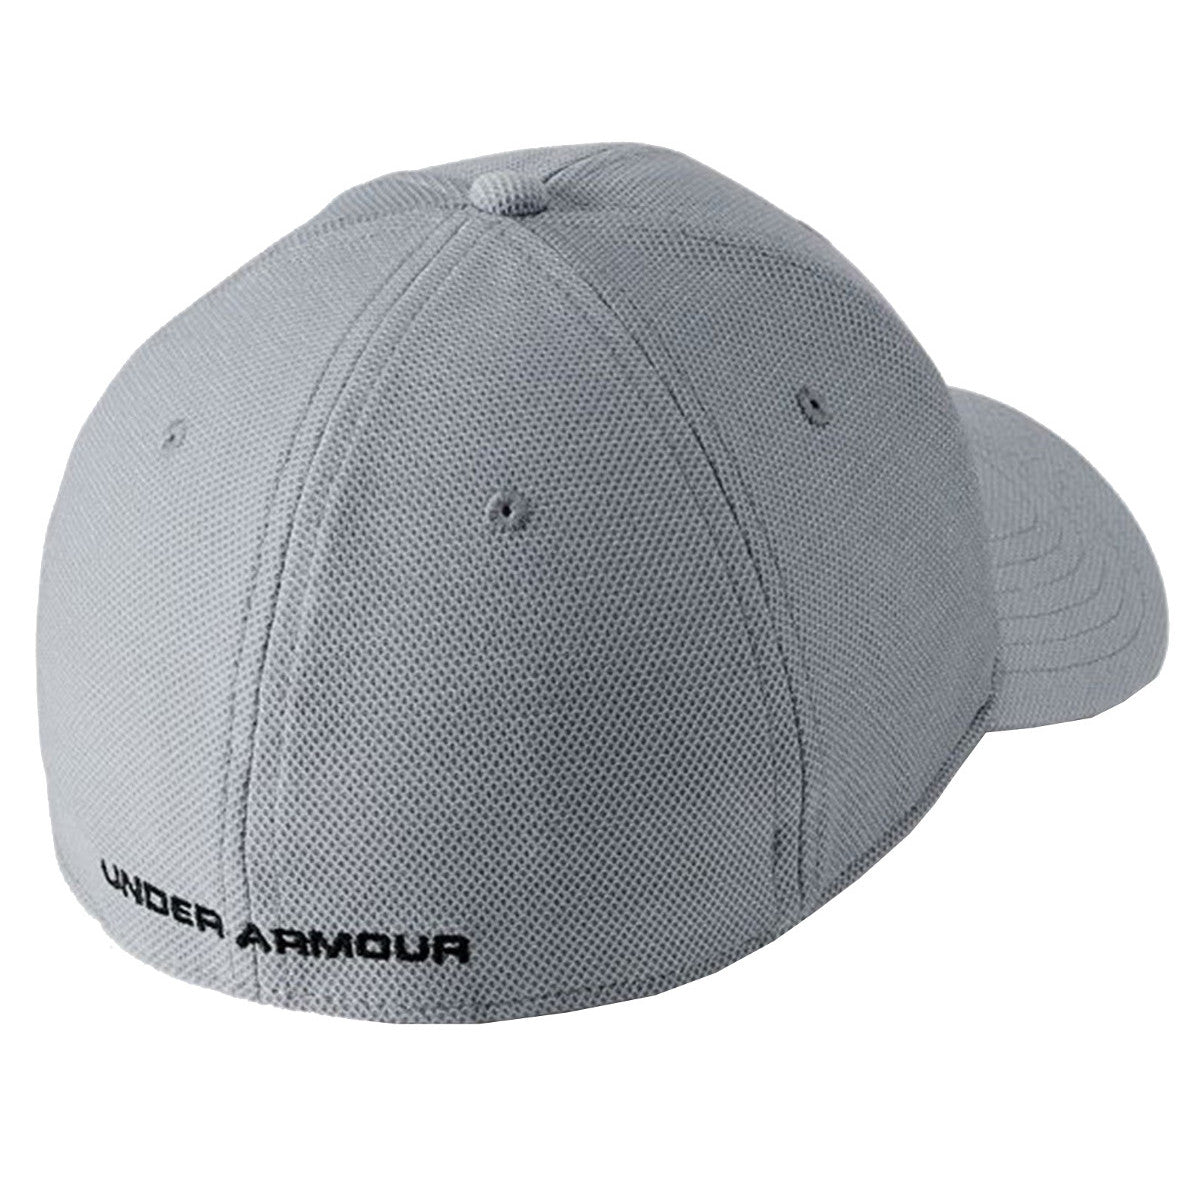 - Under Armour Mens Heathered Blitzing 3.0 Cap - (1305037 035) - F